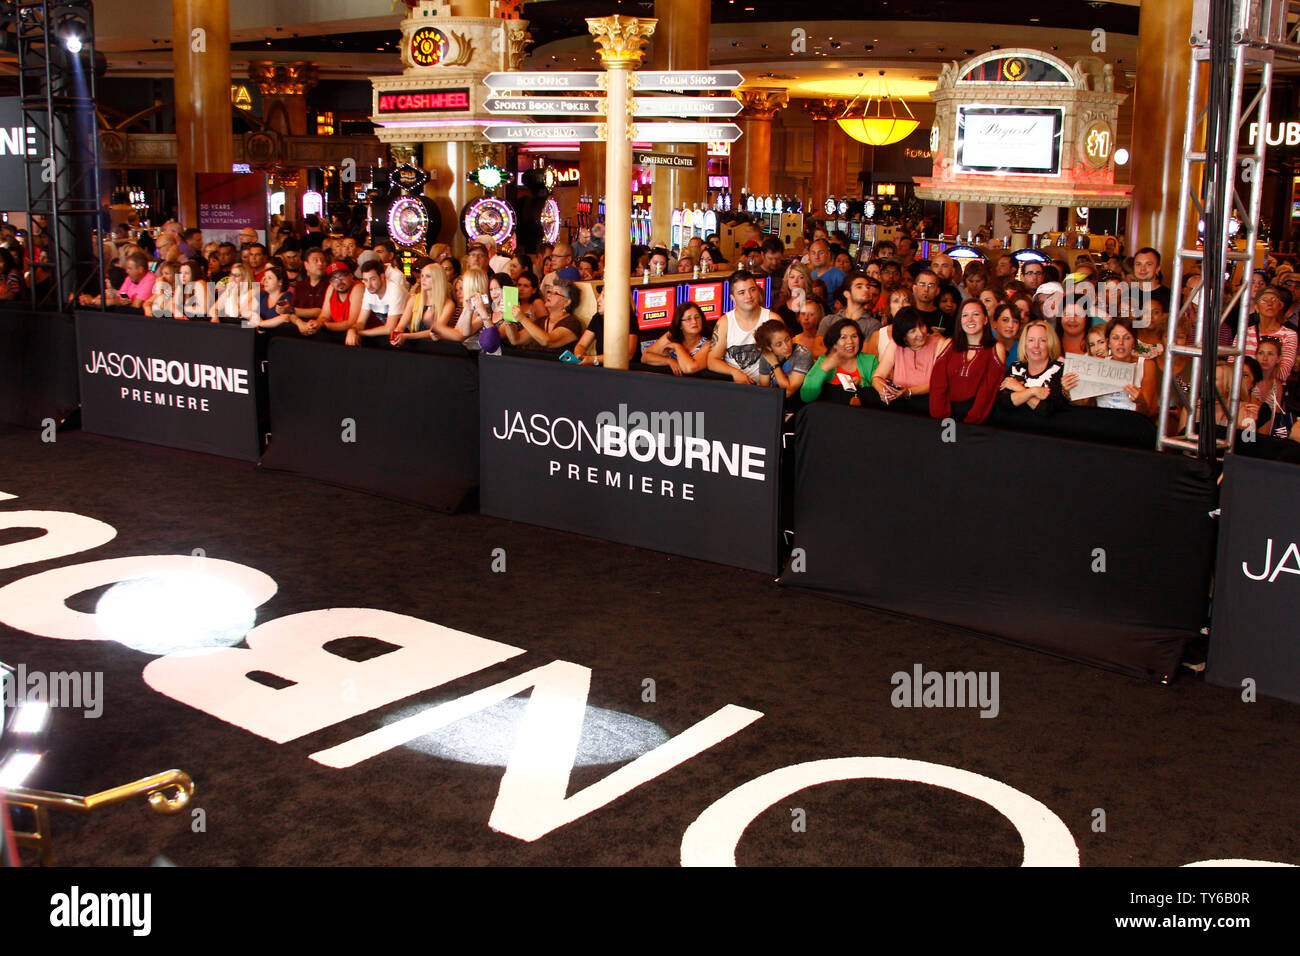 Fans at the premiere of the motion picture thriller 'Jason Bourne' at Caesars Palace in Las Vegas, Nevada on July 18, 2016. Storyline: Jason Bourne, now remembering who he truly is, tries to uncover hidden truths about his past.   Photo by James Atoa/UPI Stock Photo